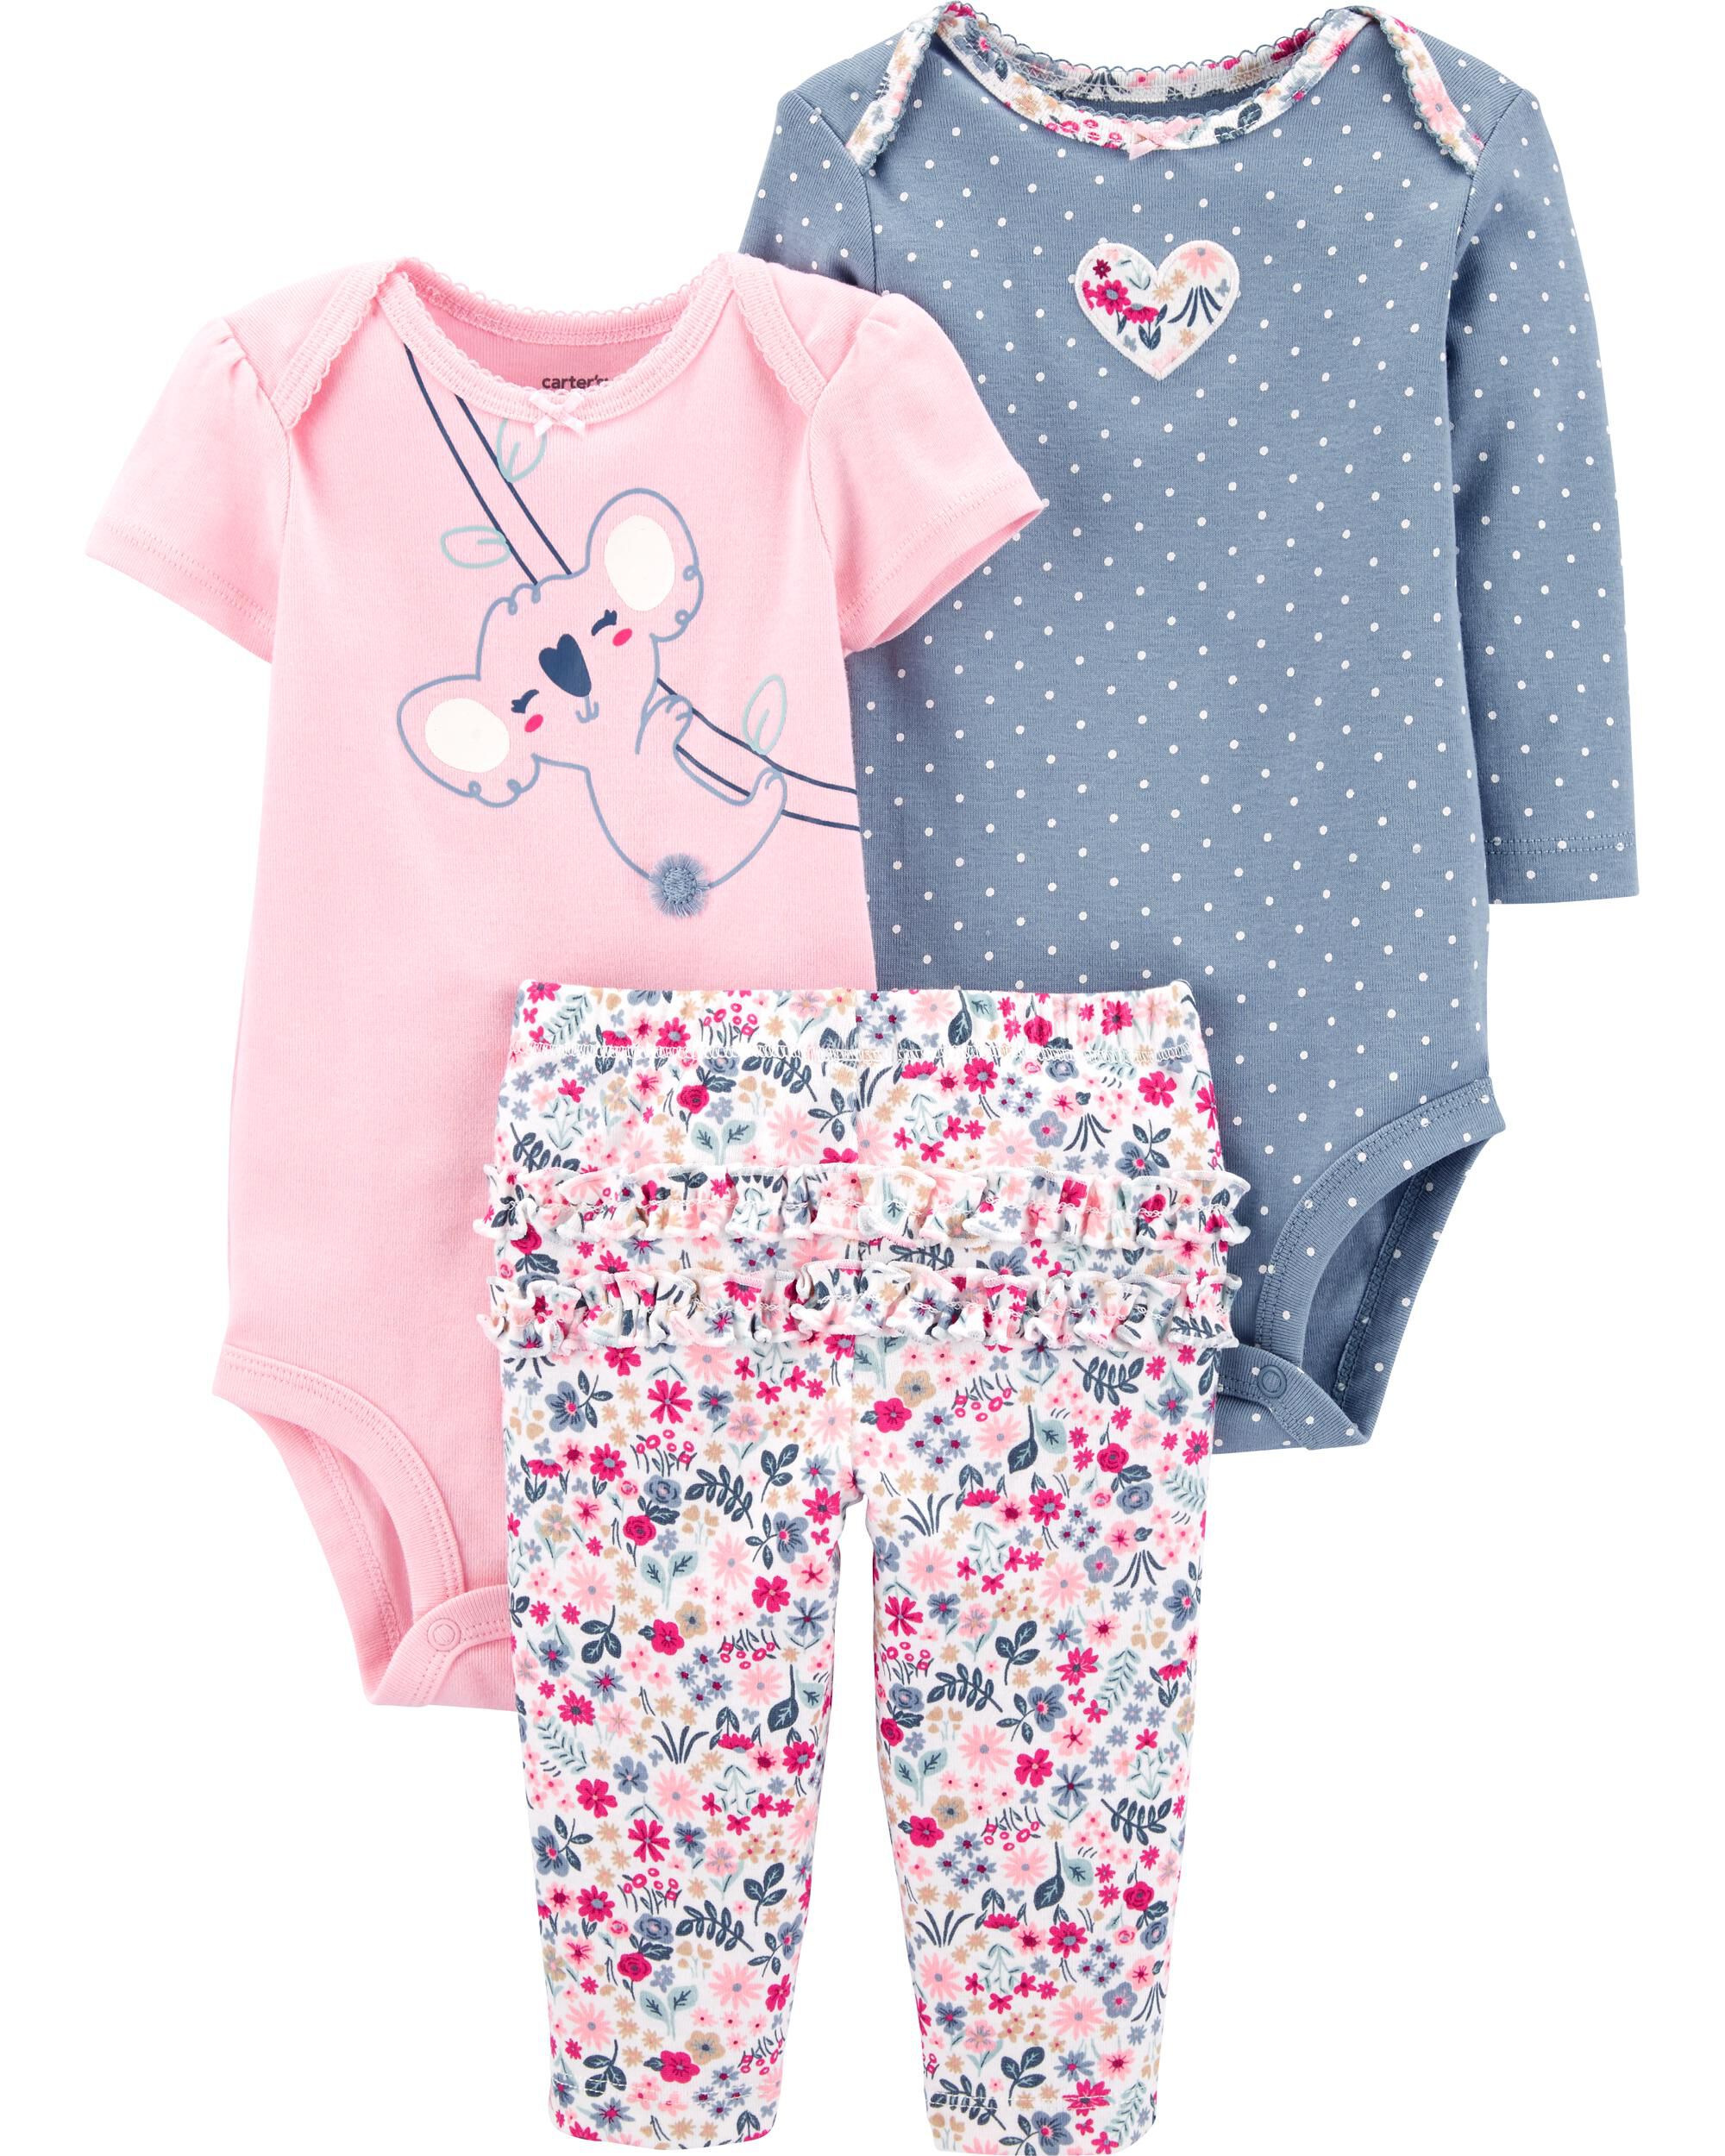 preemie outfits girl